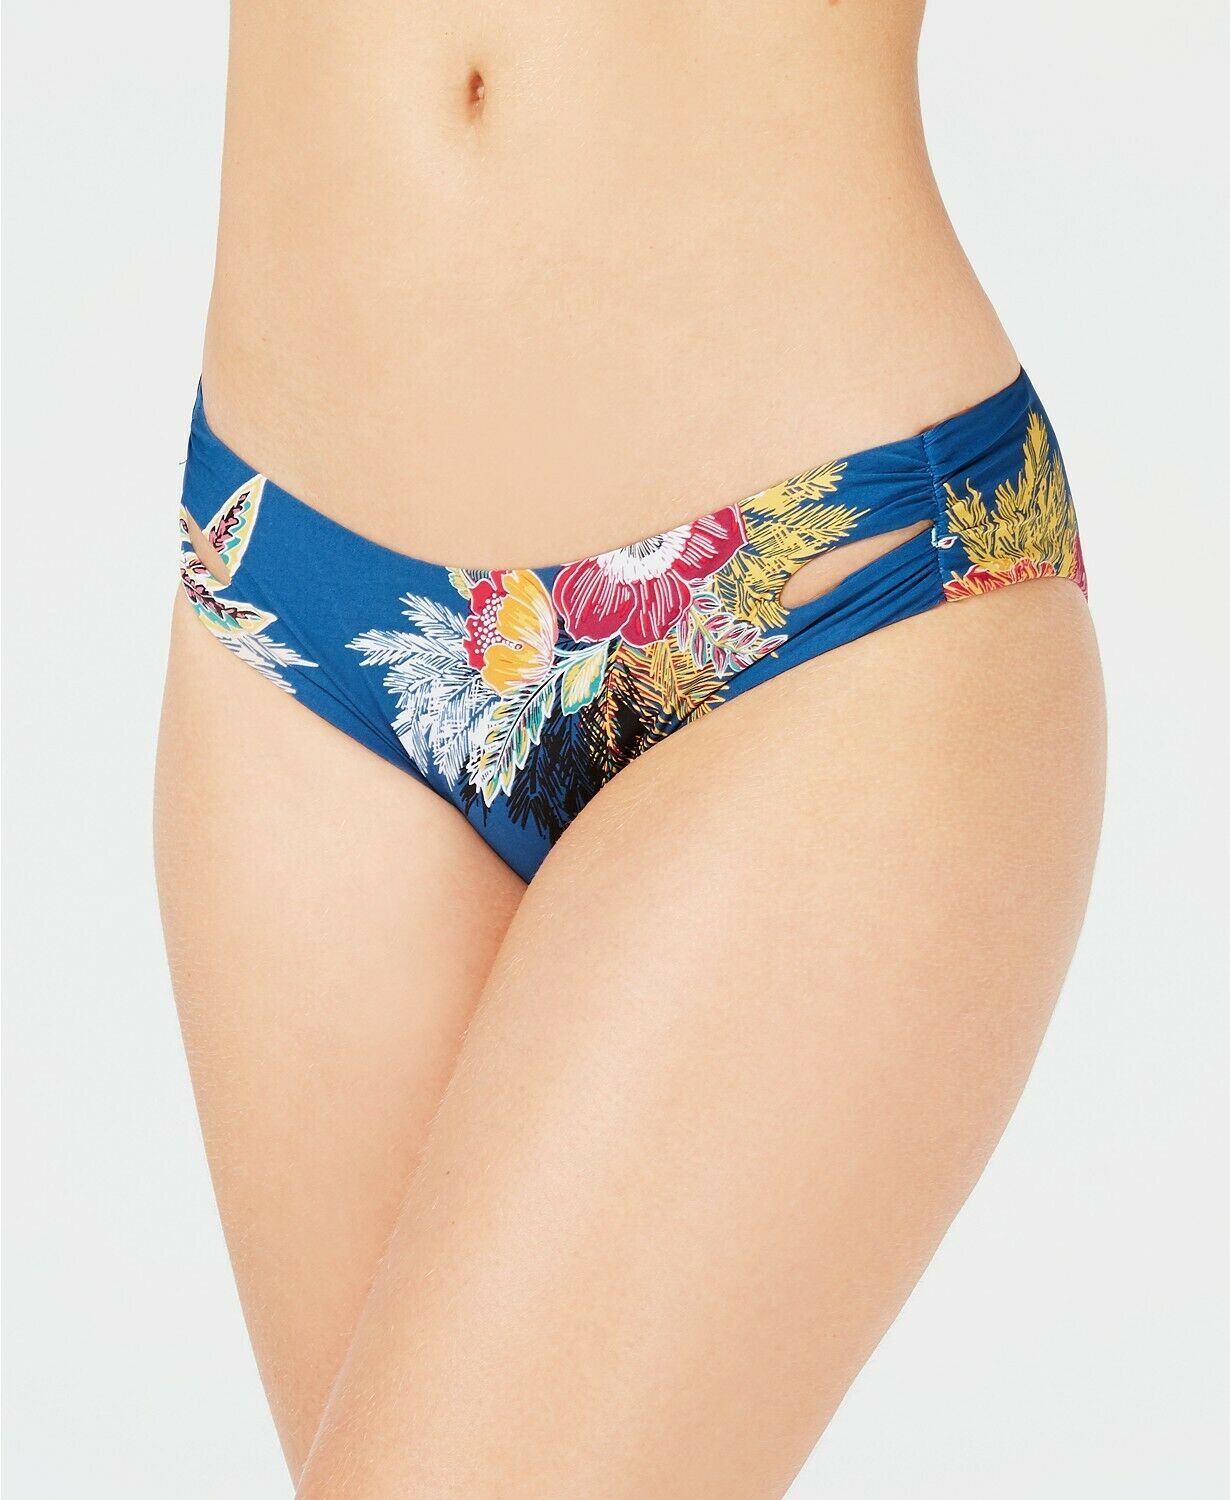 Primary image for Soluna Over The Moon Shirred Cutout Bikini Bottoms, Size L, MSRP $48